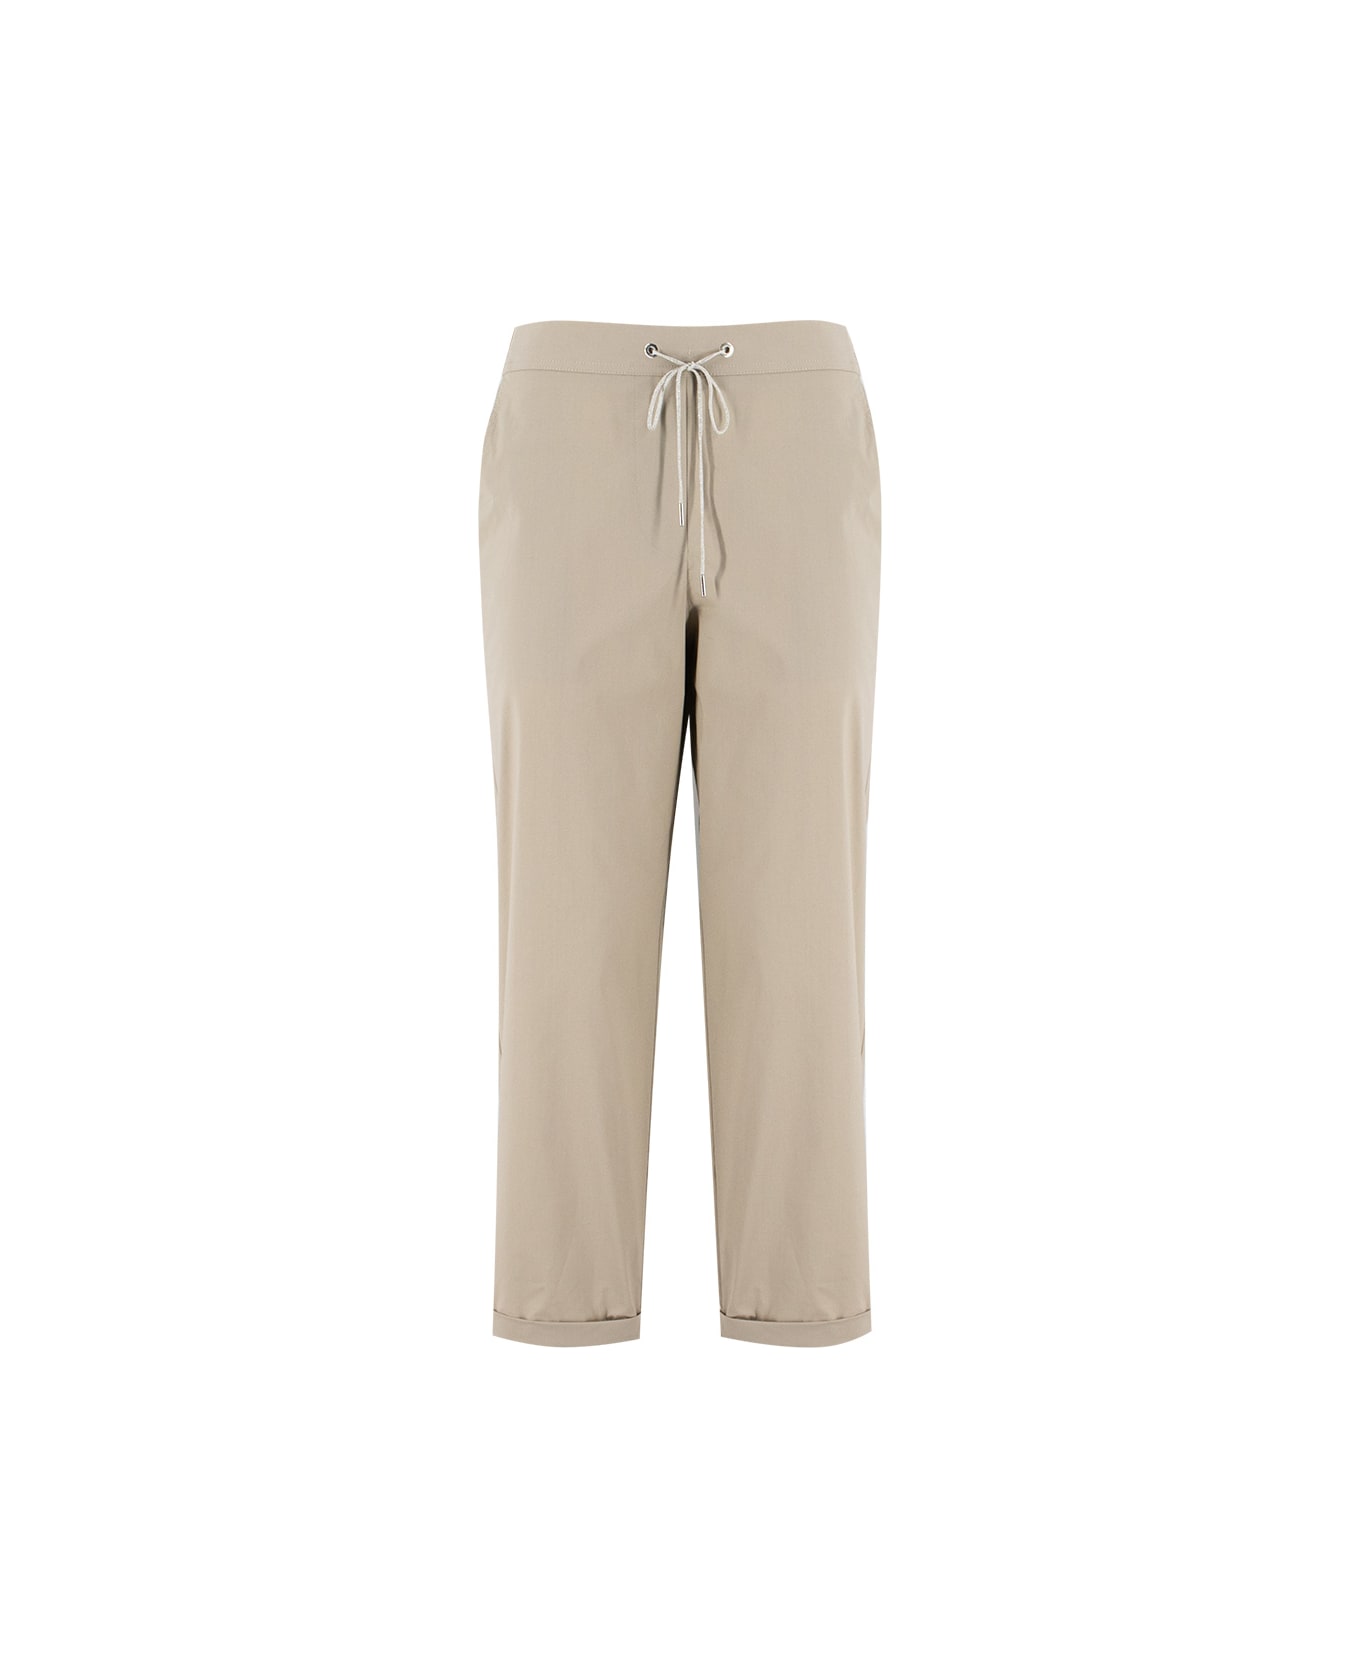 Le Tricot Perugia Trousers - BEIGE_GOLD_SILVER LX